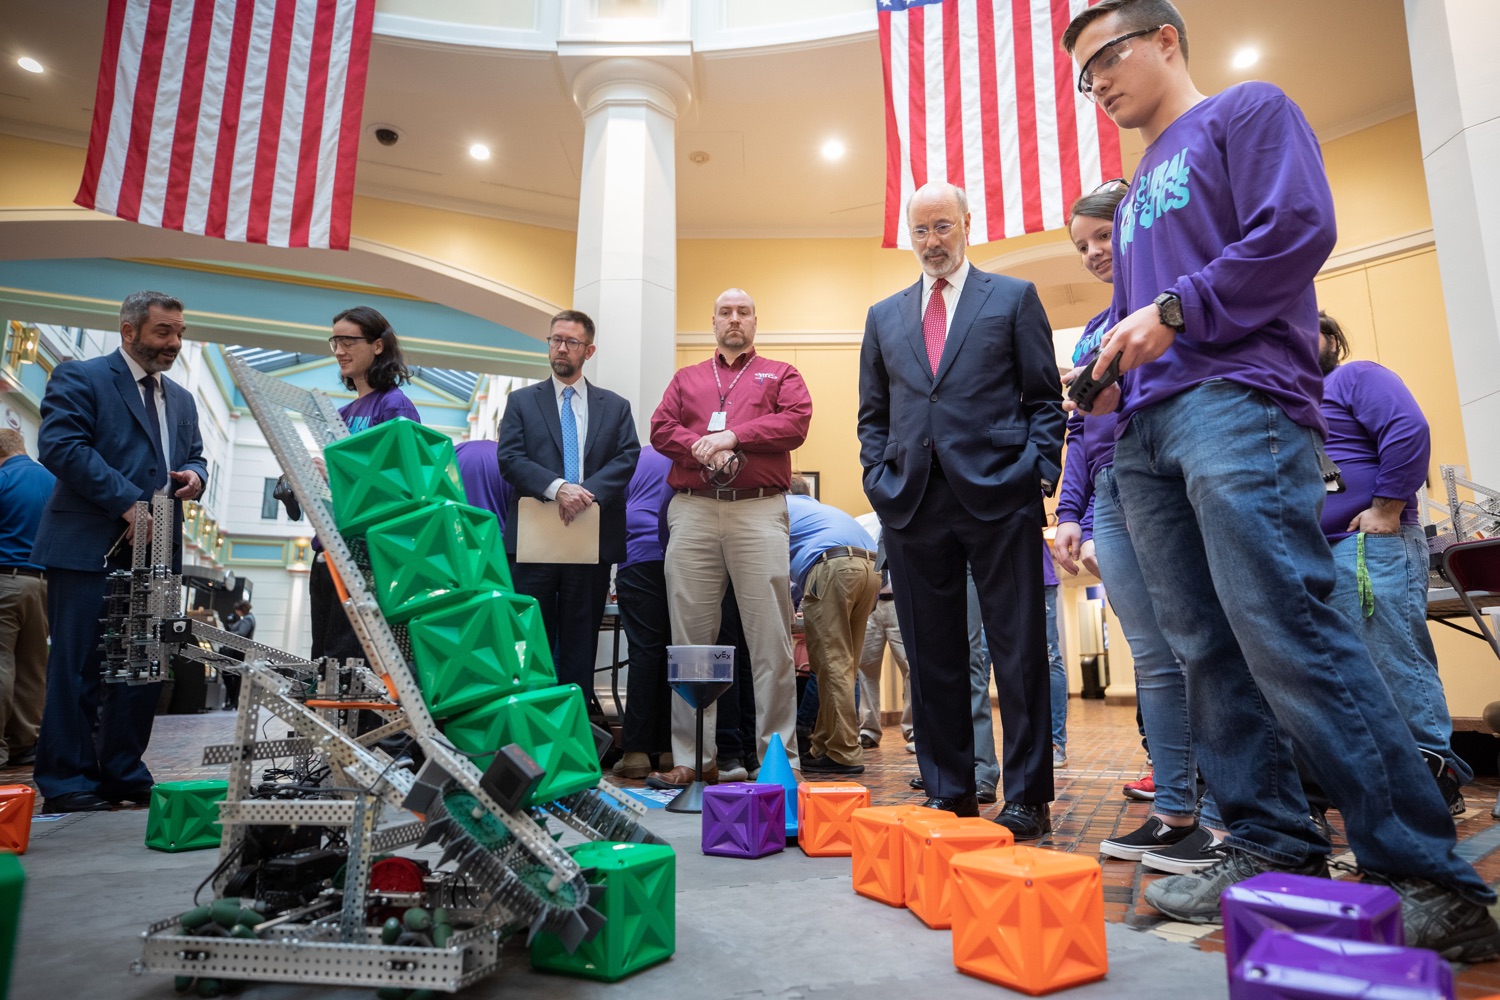 Pennsylvania Governor Tom Wolf meeting with students at the robotics demonstration.  Celebrating the success of the PAsmart workforce development program to create educational opportunities at schools across the commonwealth, Governor Tom Wolf welcomed more than 50 students from the Pennsylvania Rural Robotics Initiative to the Capitol today. The students from nine western Pennsylvania school districts showcased their skills in coding, robotics and drone technology. The Wolf administration awarded the initiative a $299,000 PAsmart Advancing Grant earlier this year. Harrisburg, PA  Tuesday, November 12, 2019<br><a href="https://filesource.amperwave.net/commonwealthofpa/photo/17587_gov_pasmart_rural_robotics_dz_005.jpg" target="_blank">⇣ Download Photo</a>